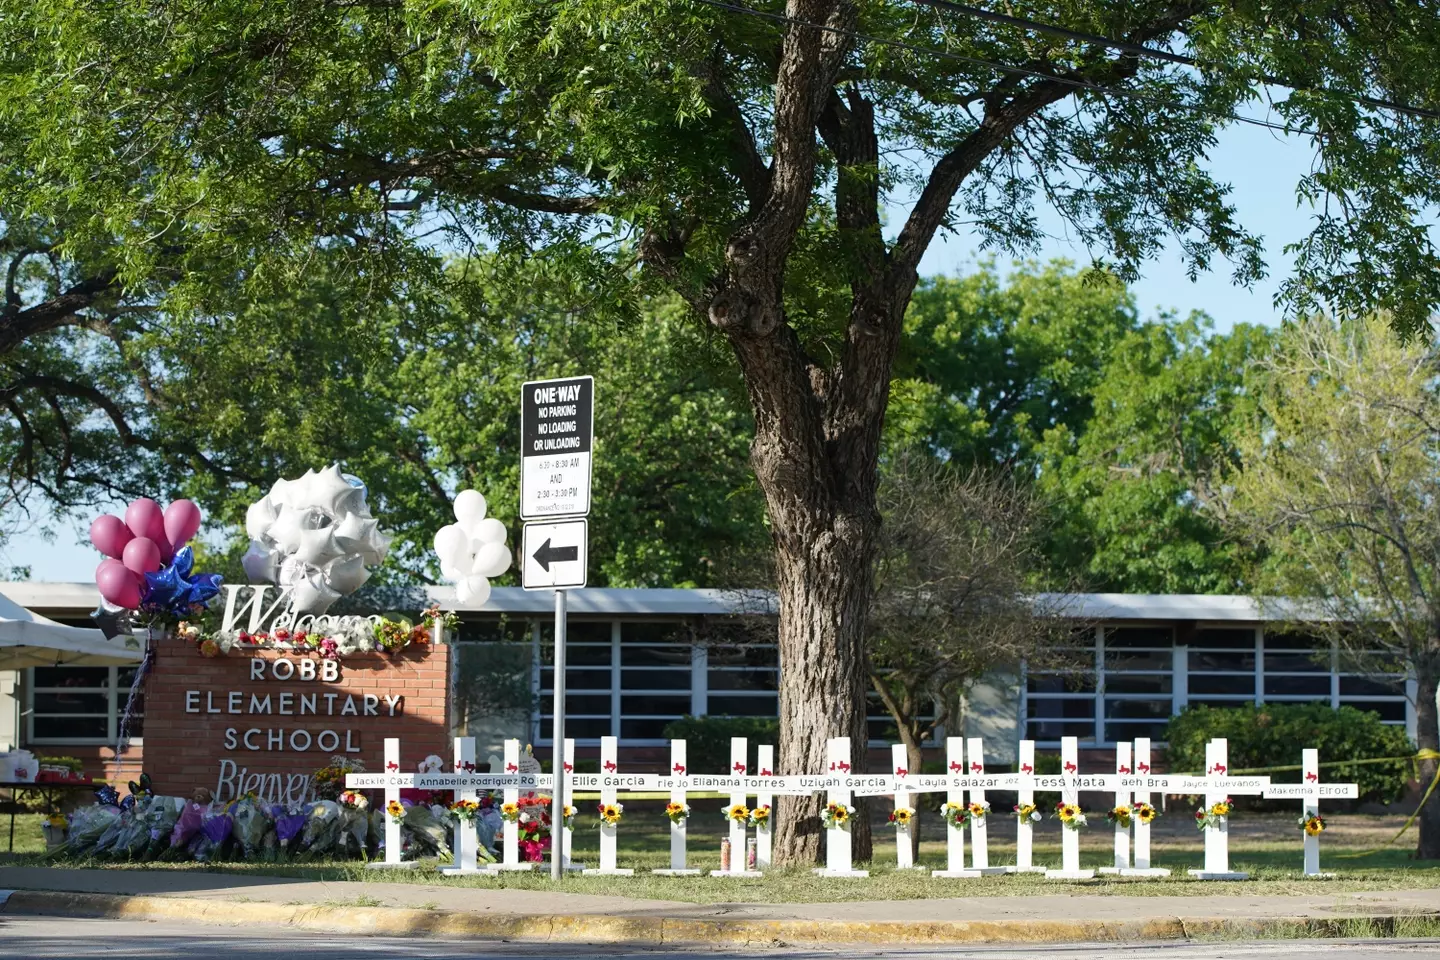 A total of 19 students and two teachers died during the Uvalde school shooting.